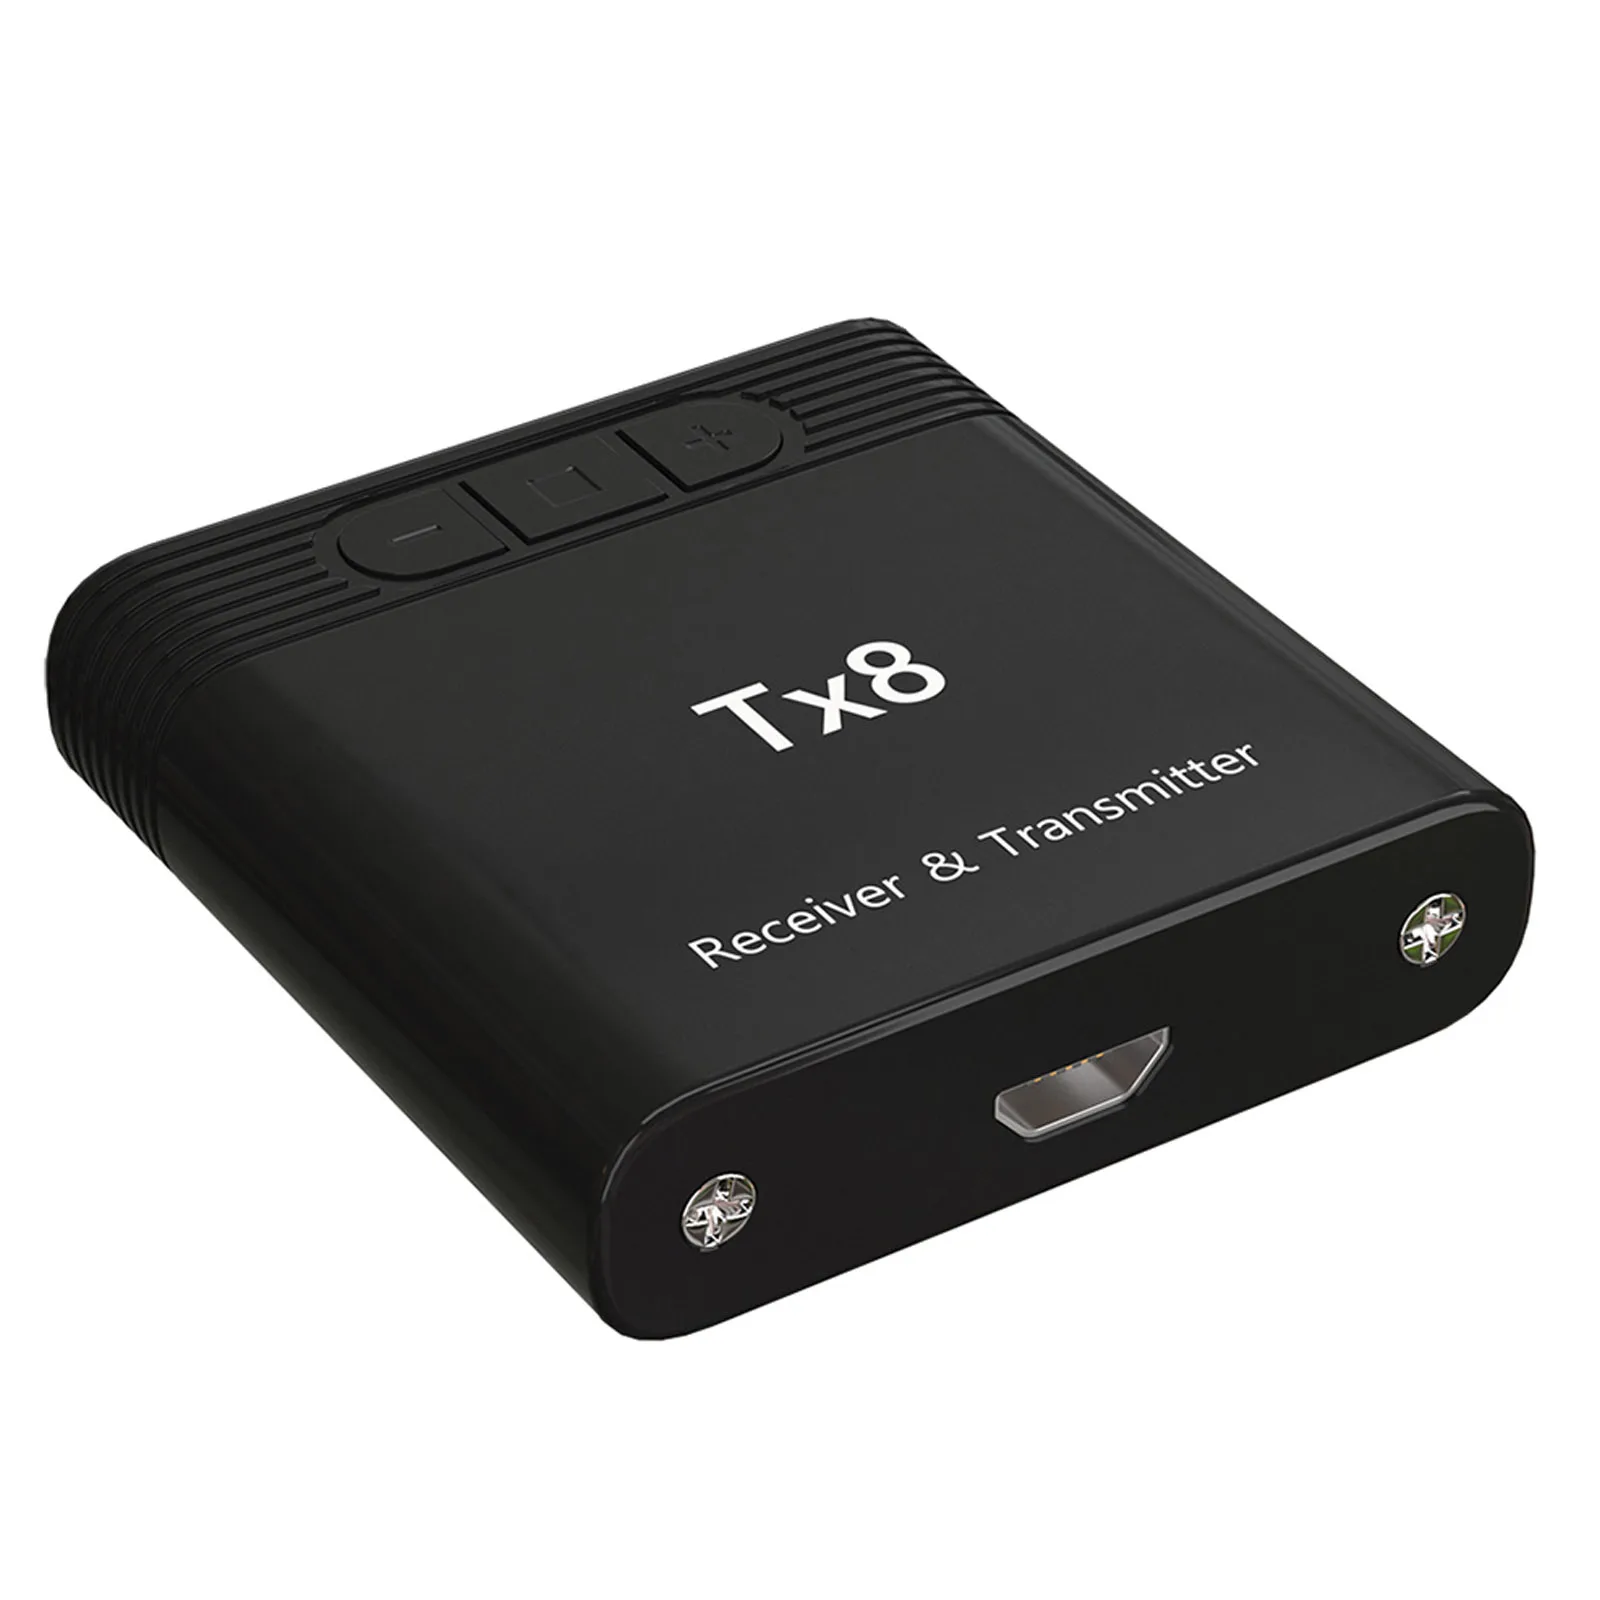 

Tx8 2 in 1 Bluetooth 5.0 Transmitter Receiver Audio Adapter for TV PC Headphone MP3/MP4 Music Playback